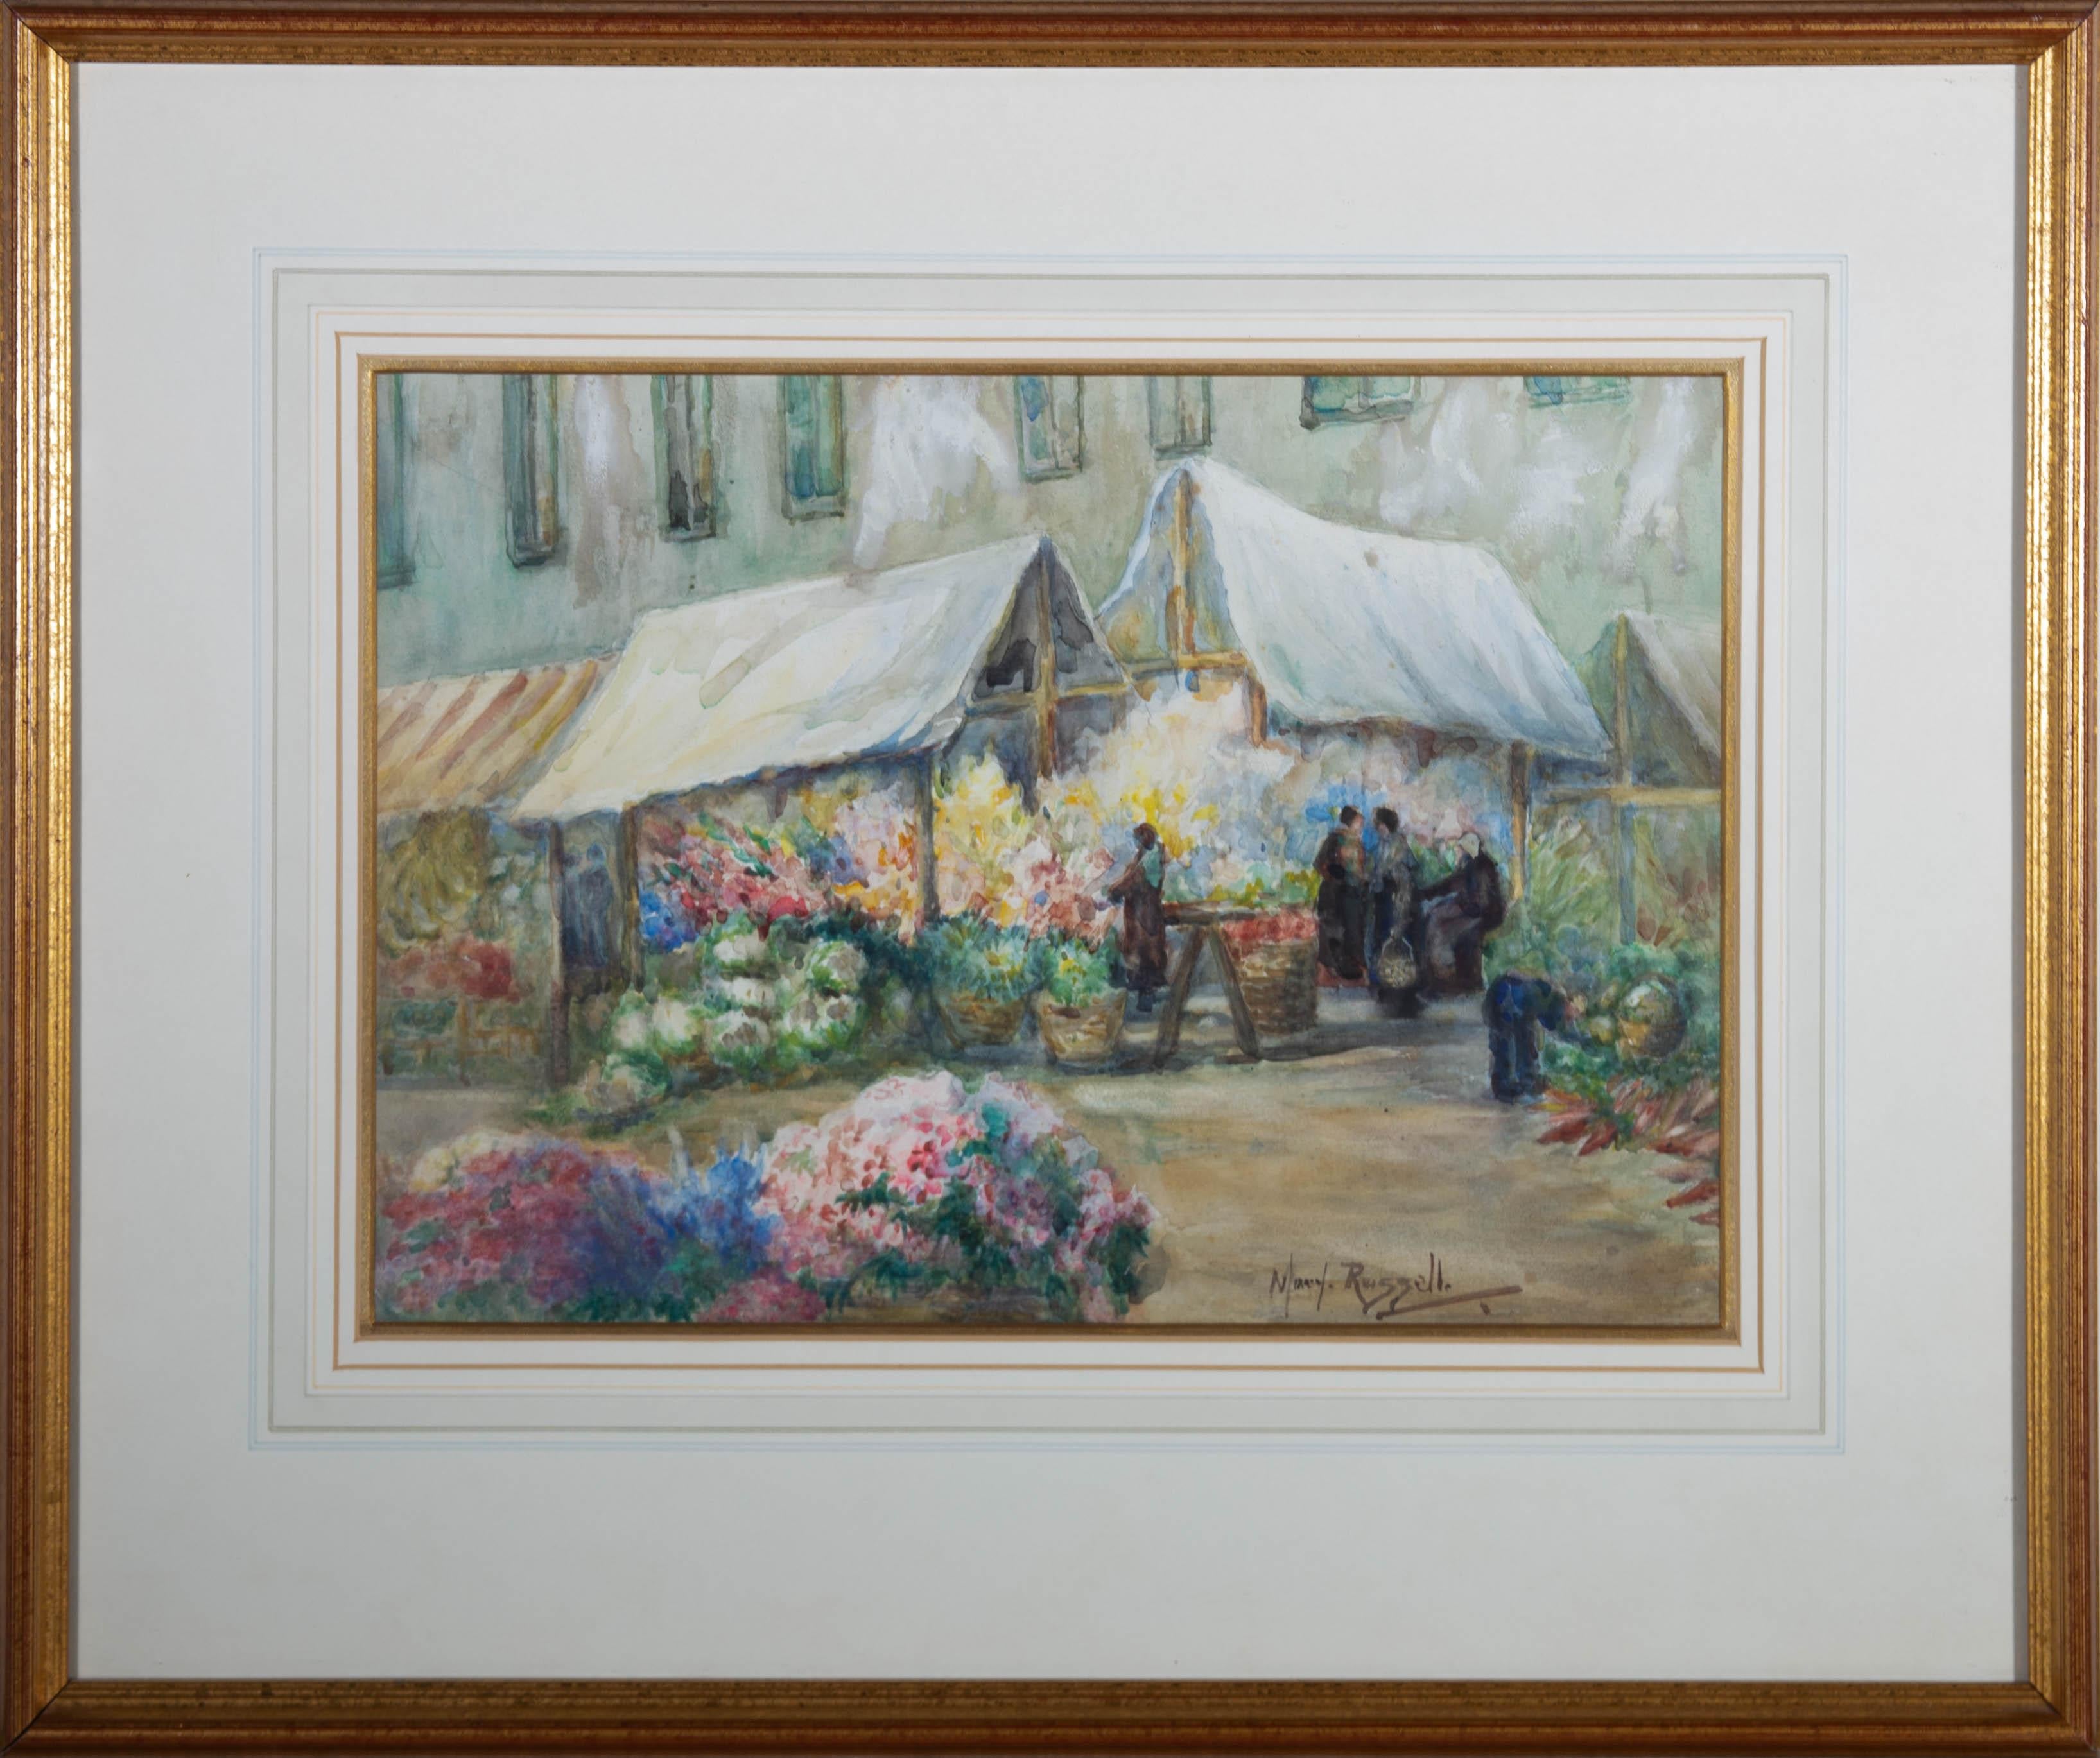 This charming watercolour scene depicts a vibrant flower market in Dieppe, France. Figures with large baskets browse the selection of bright flowers on the narrow French Street. Painted in an impressionist style with soft watercolour hues. Label